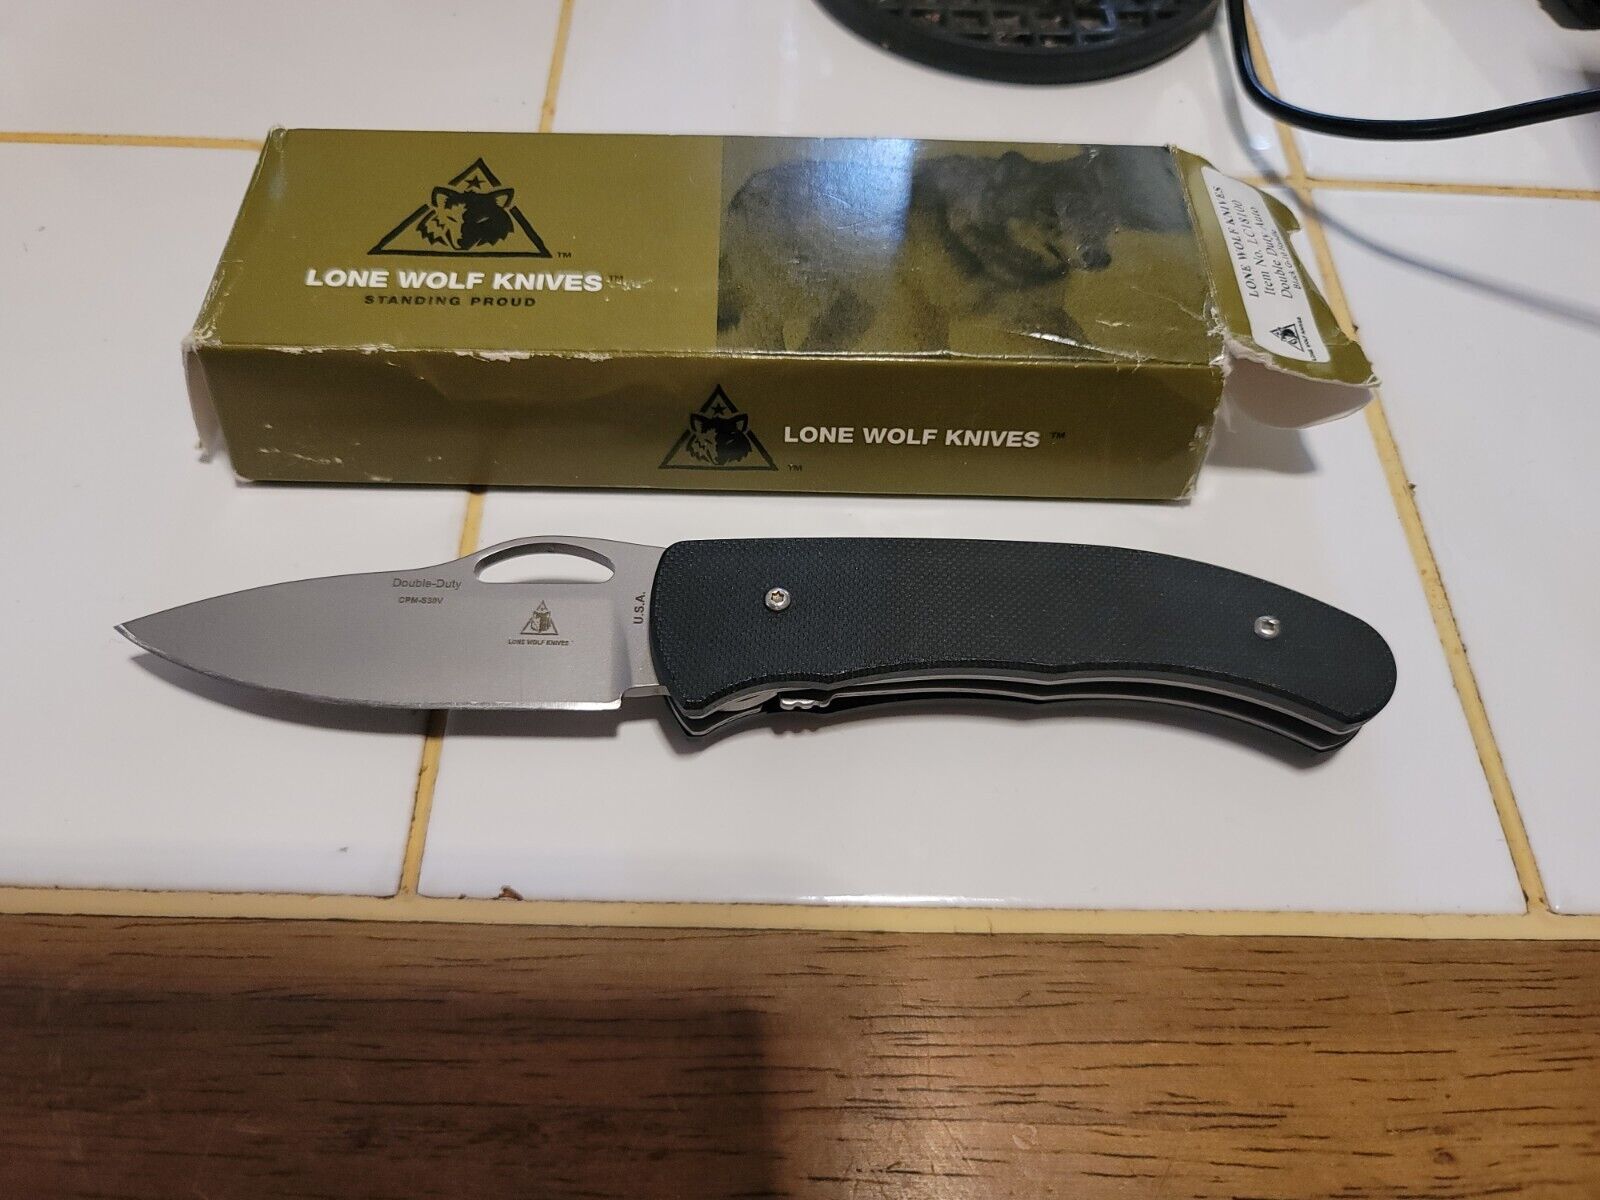 LONE WOLF KNIVES DOUBLE DUTY POCKET KNIFE S30V BLADE G10 SCALES DA EXC. COND. 